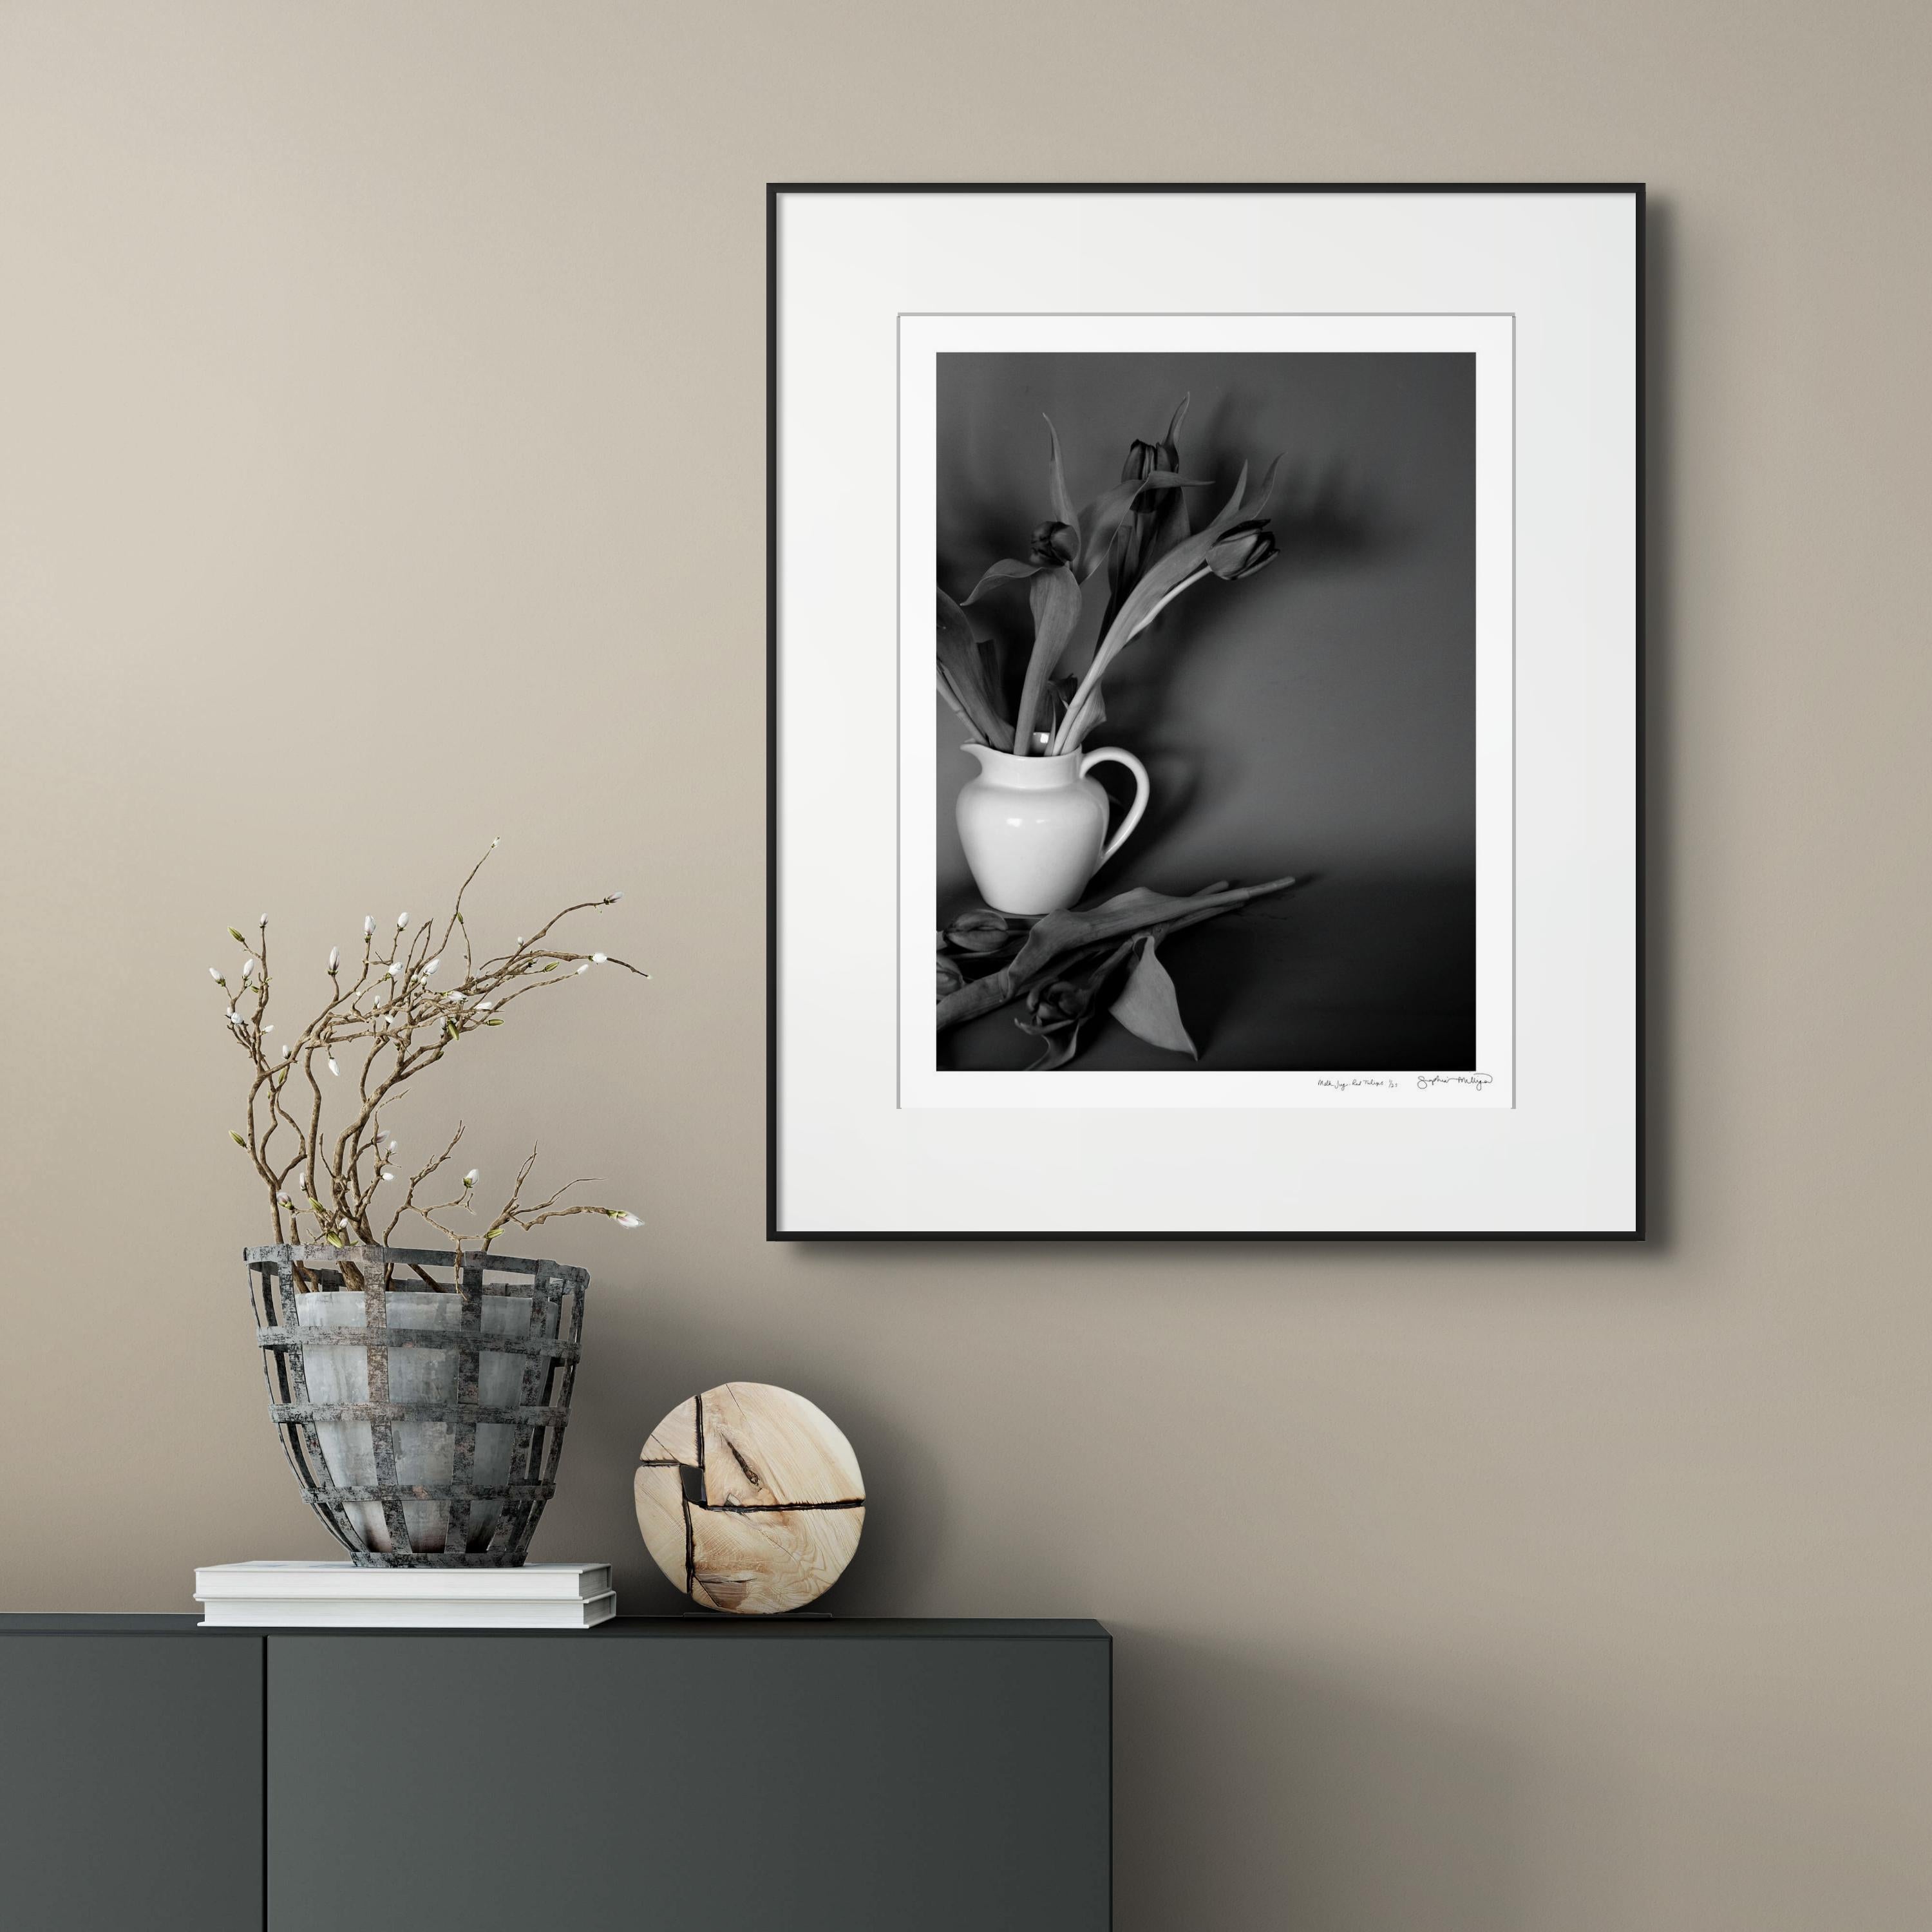 'Milk Jug, Red Tulips' 
Limited edition (#2 of 25) archival black and white photograph. Unframed.
_________________
Sophia's poetic photographs are an exploration of the balance in all things: in the sensual interplay of light and shadow; in virile